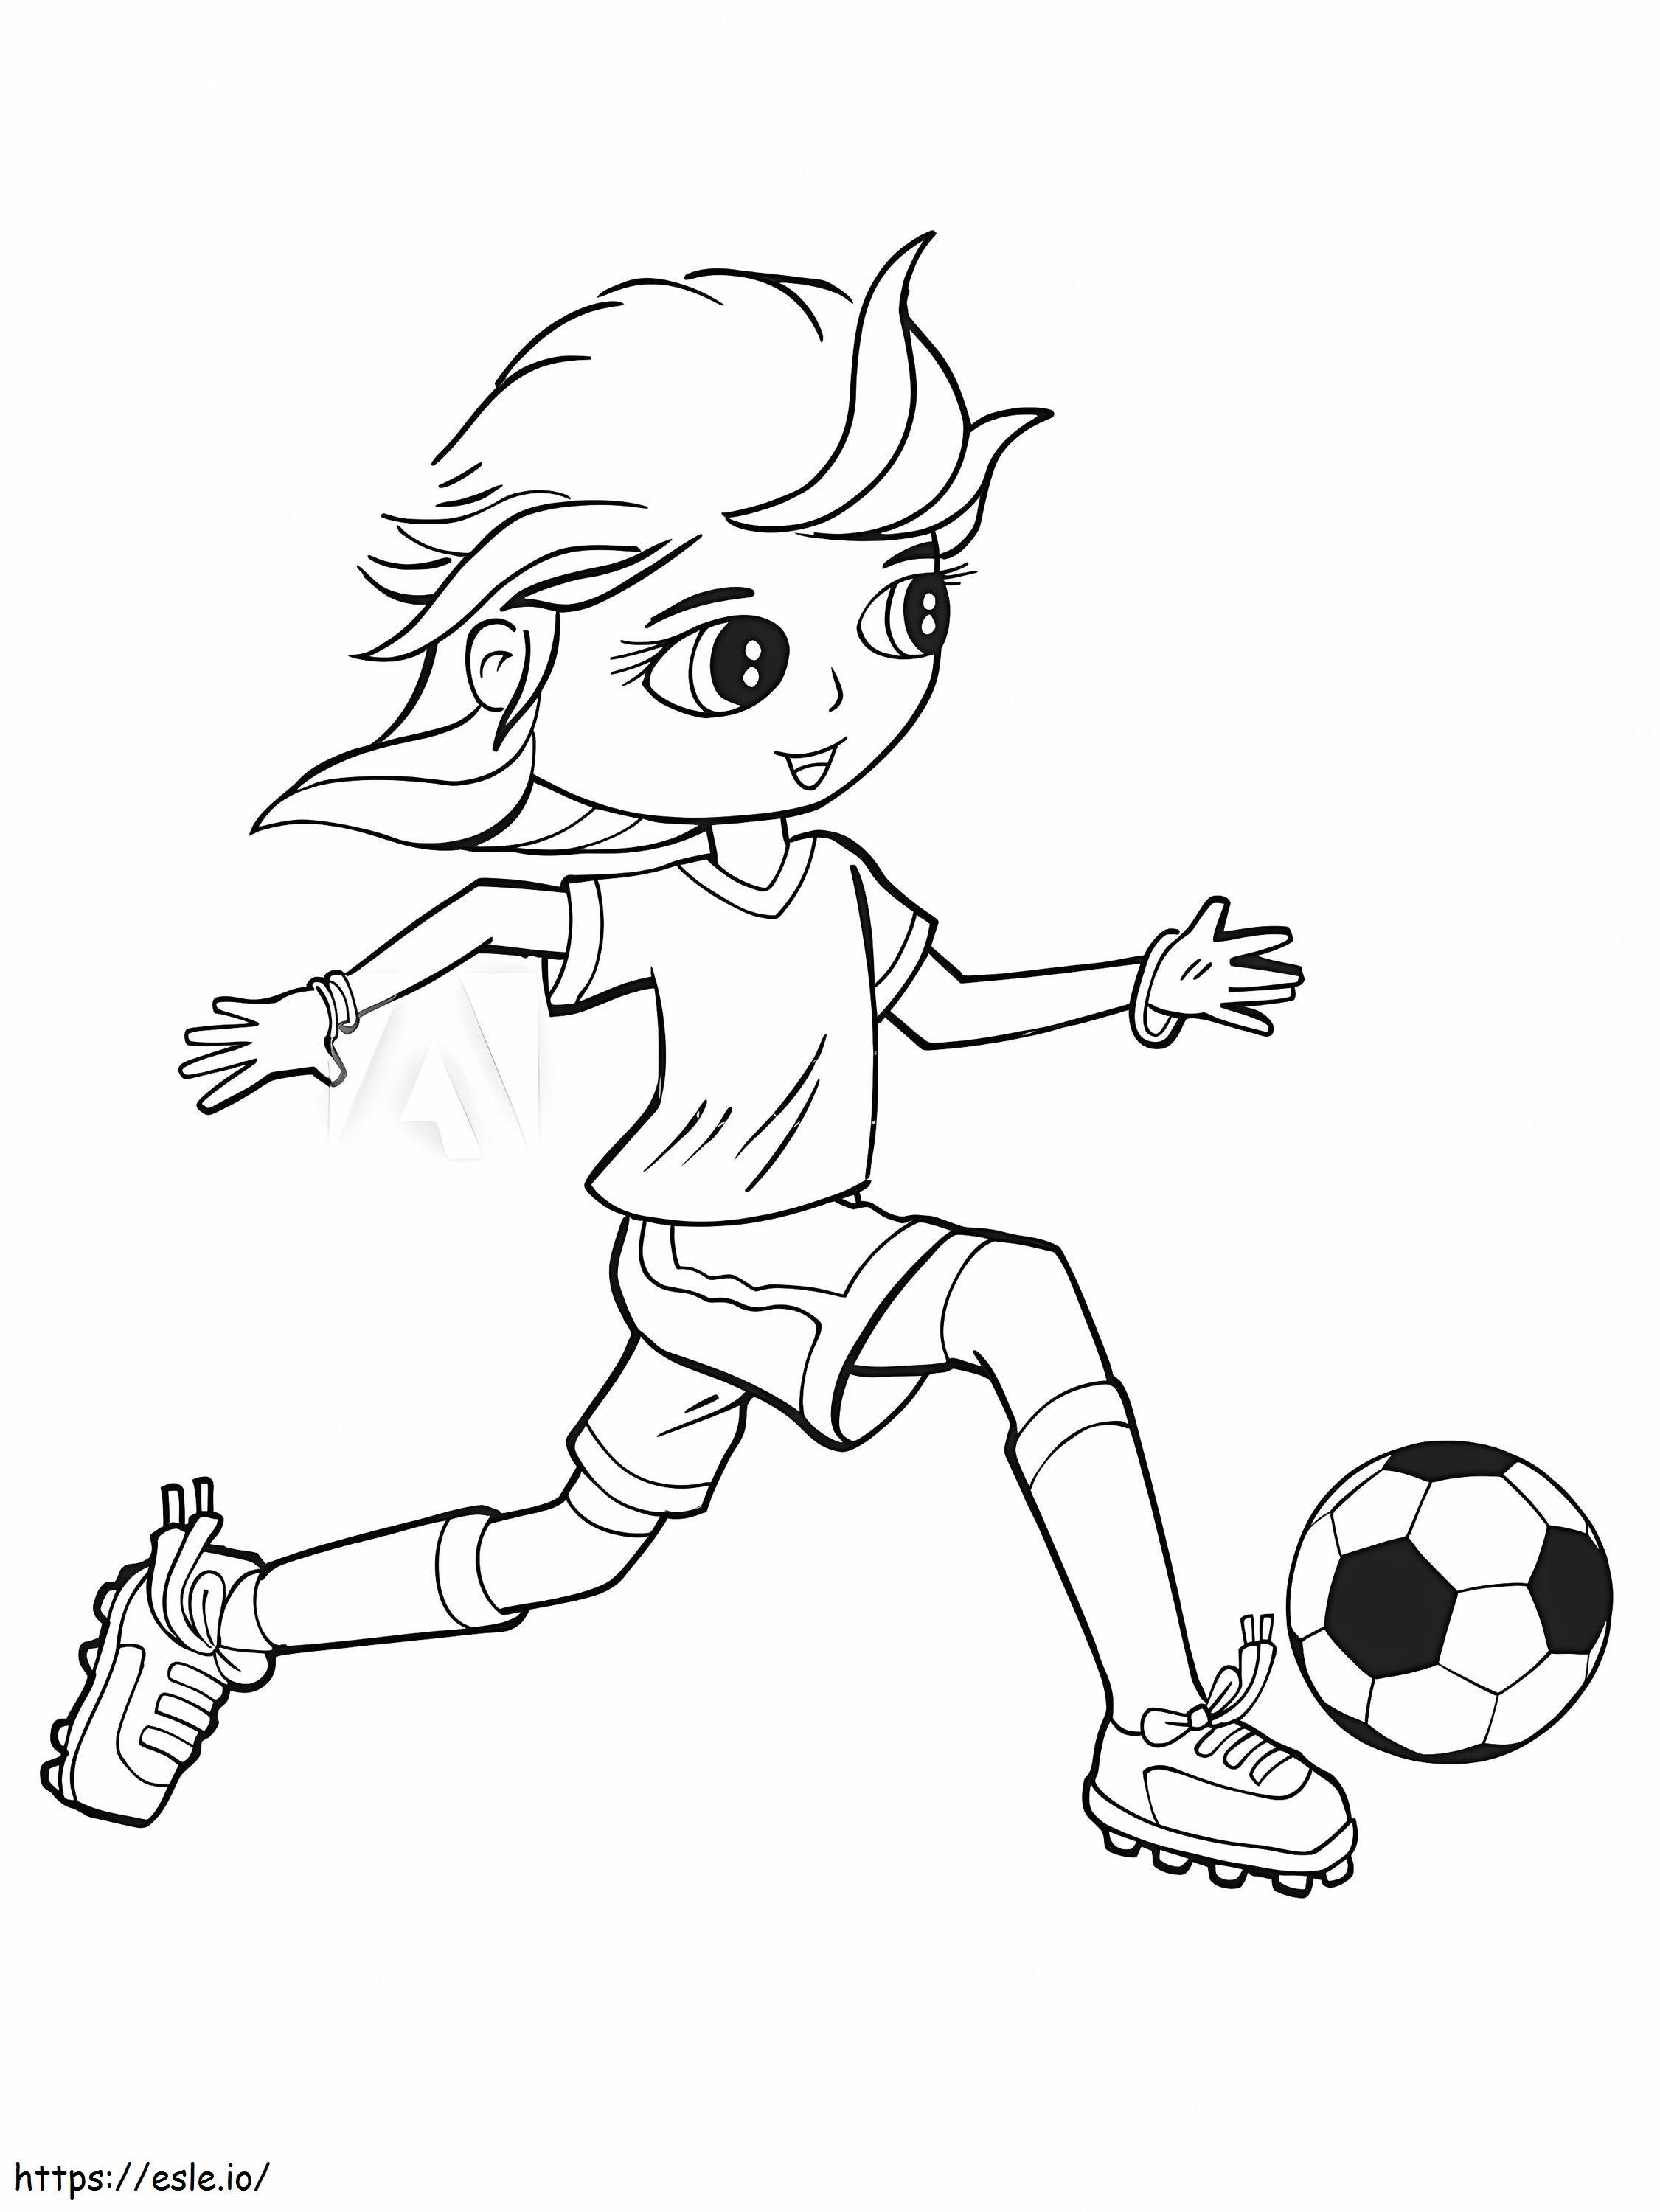 Cool Girl Playing Soccer coloring page